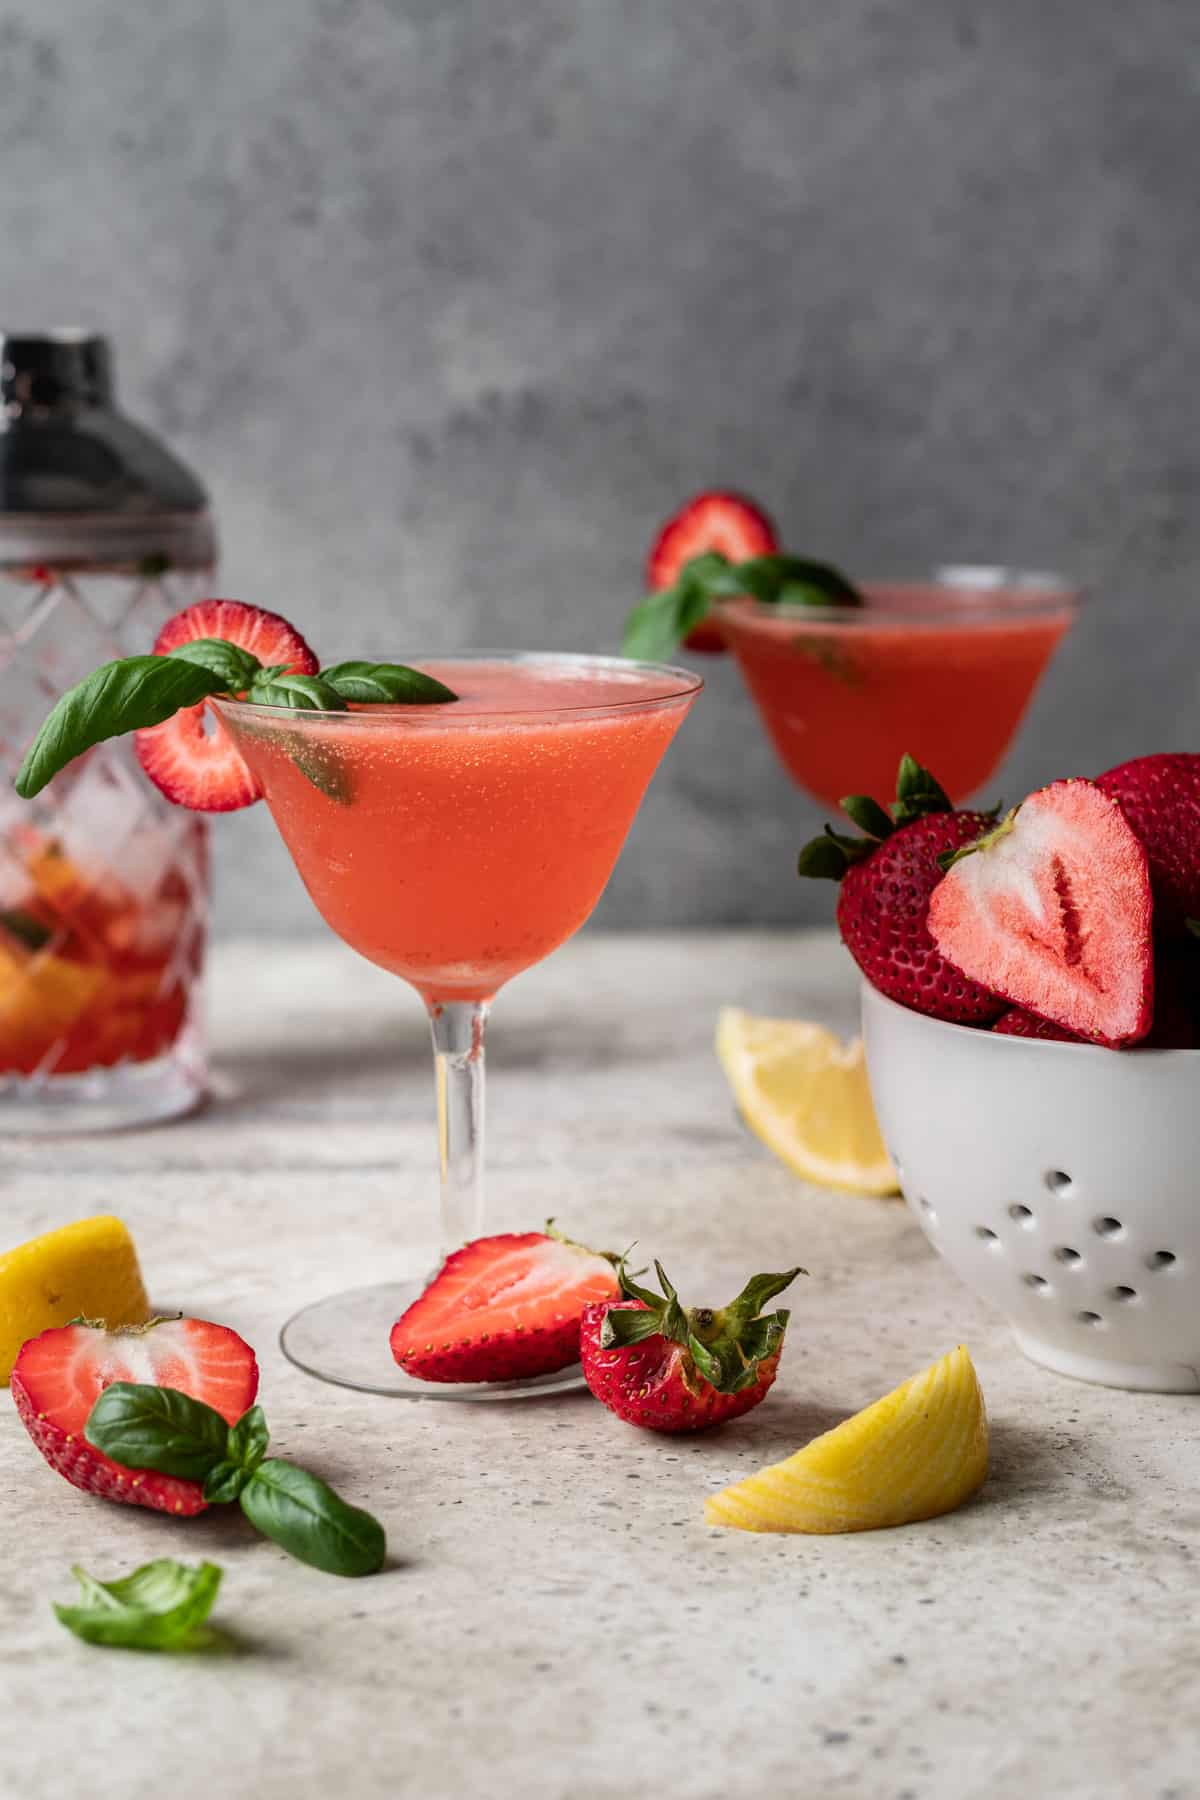 Strawberry basil gin smash surrounded by lemon wedges and sliced strawberries.